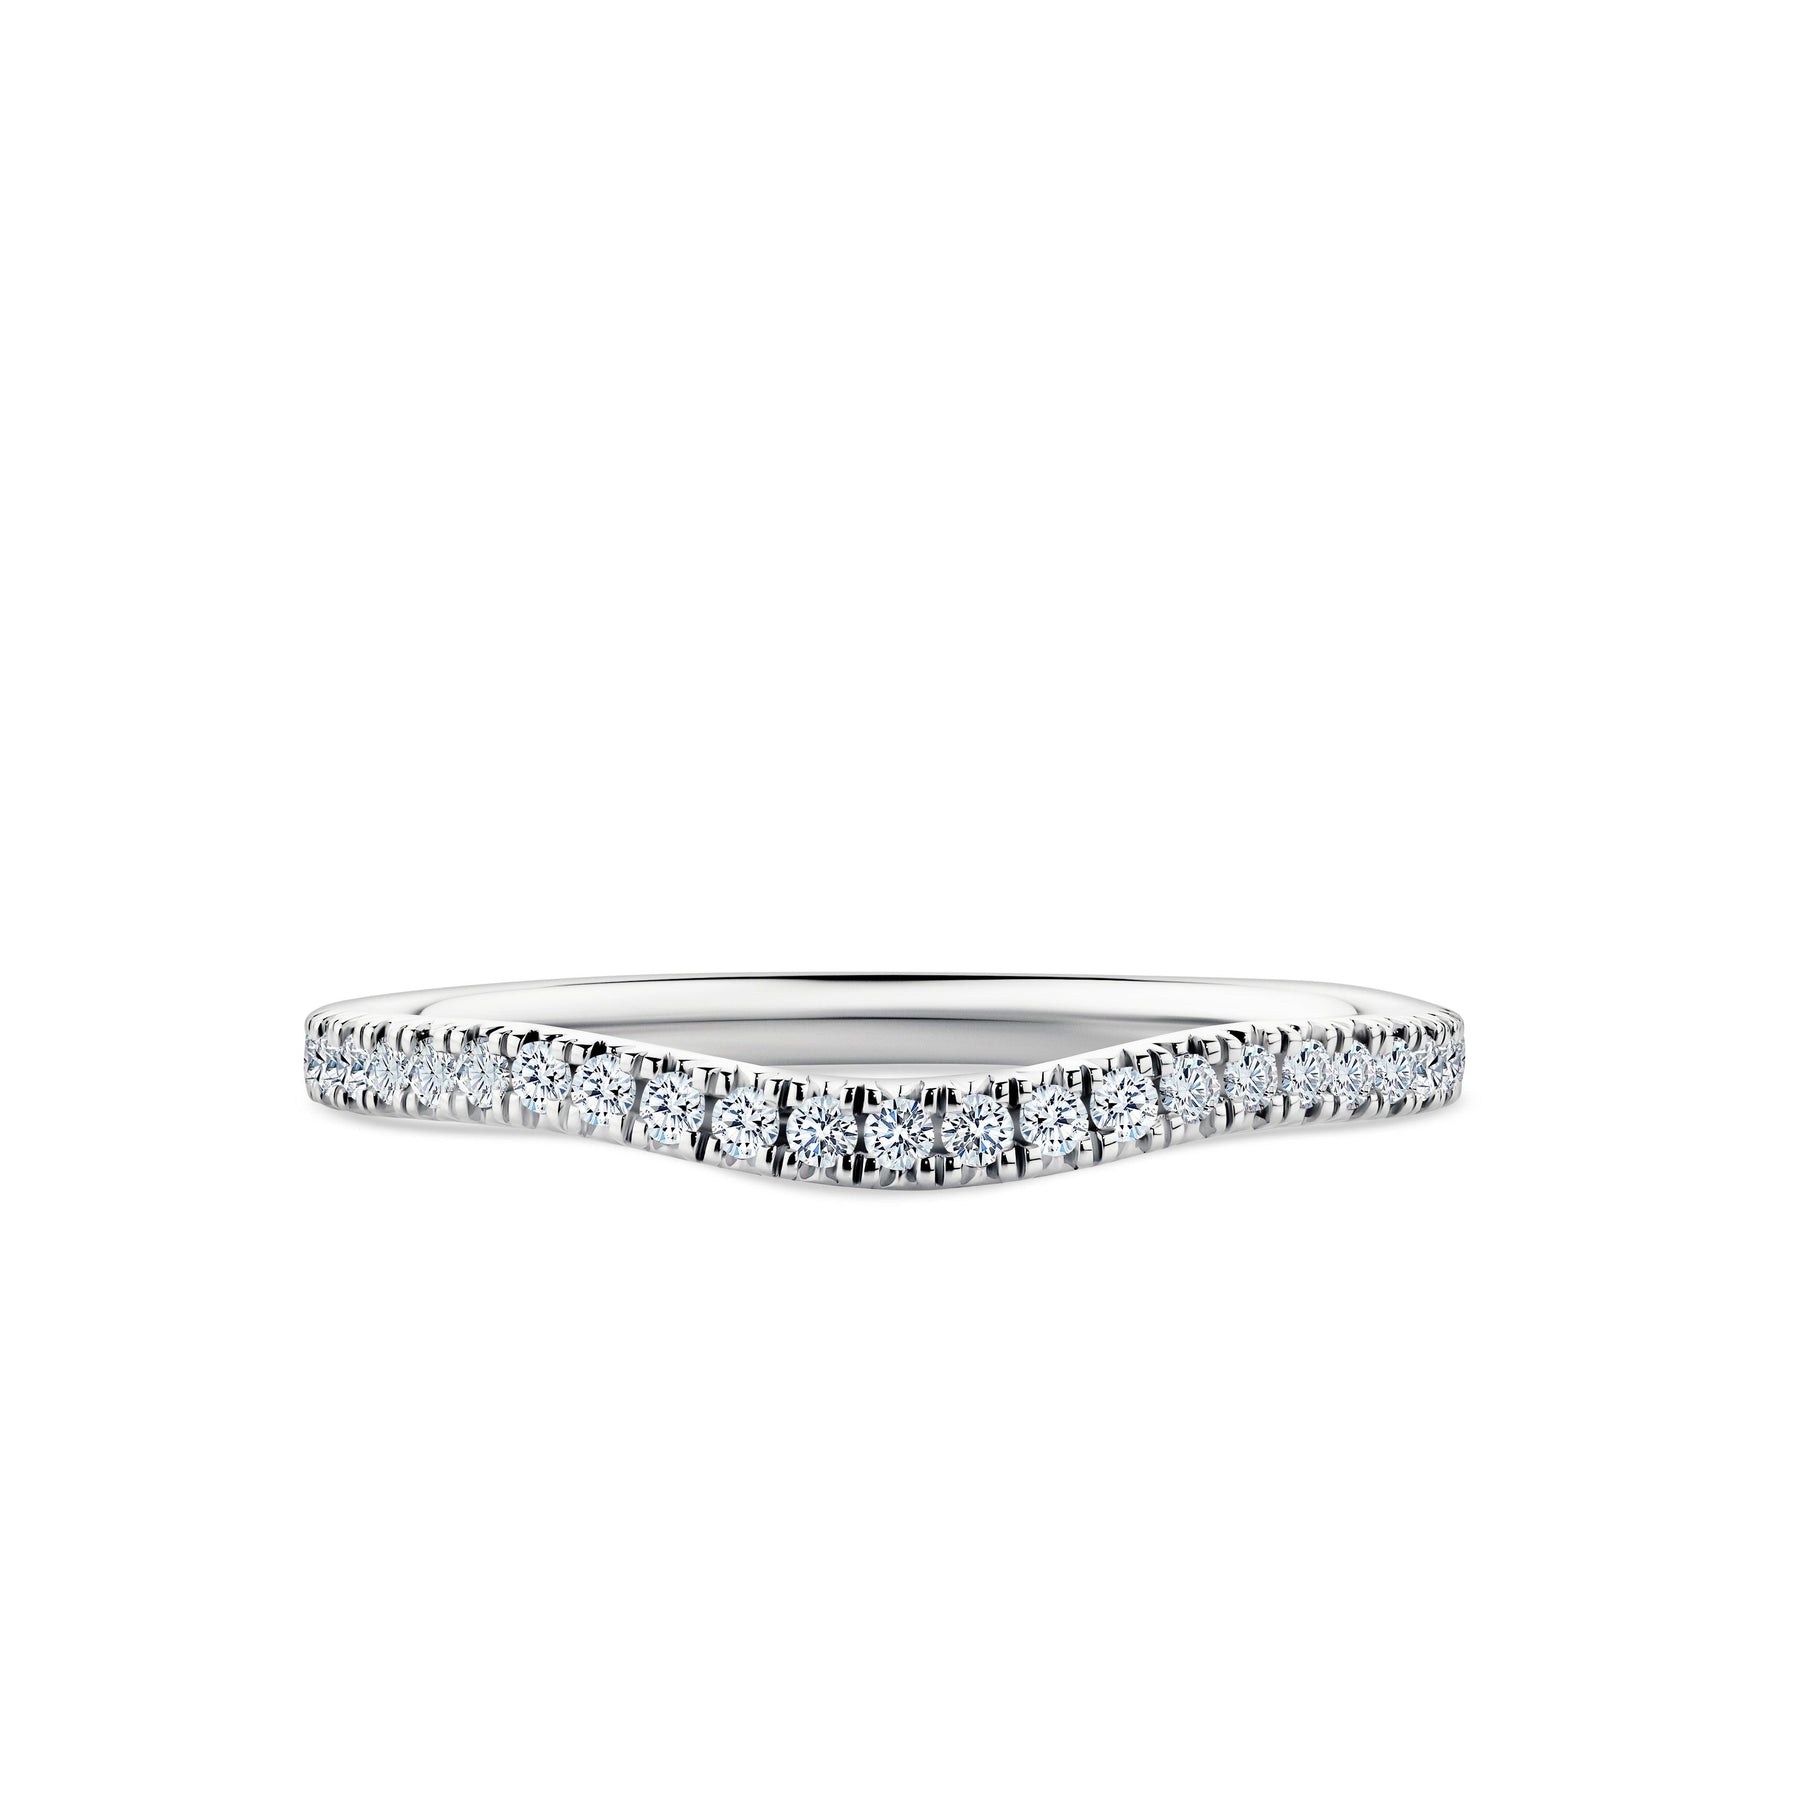 1917™ 0.21ct TW Diamond Pave Wedding Band in 18ct White Gold - Wallace Bishop